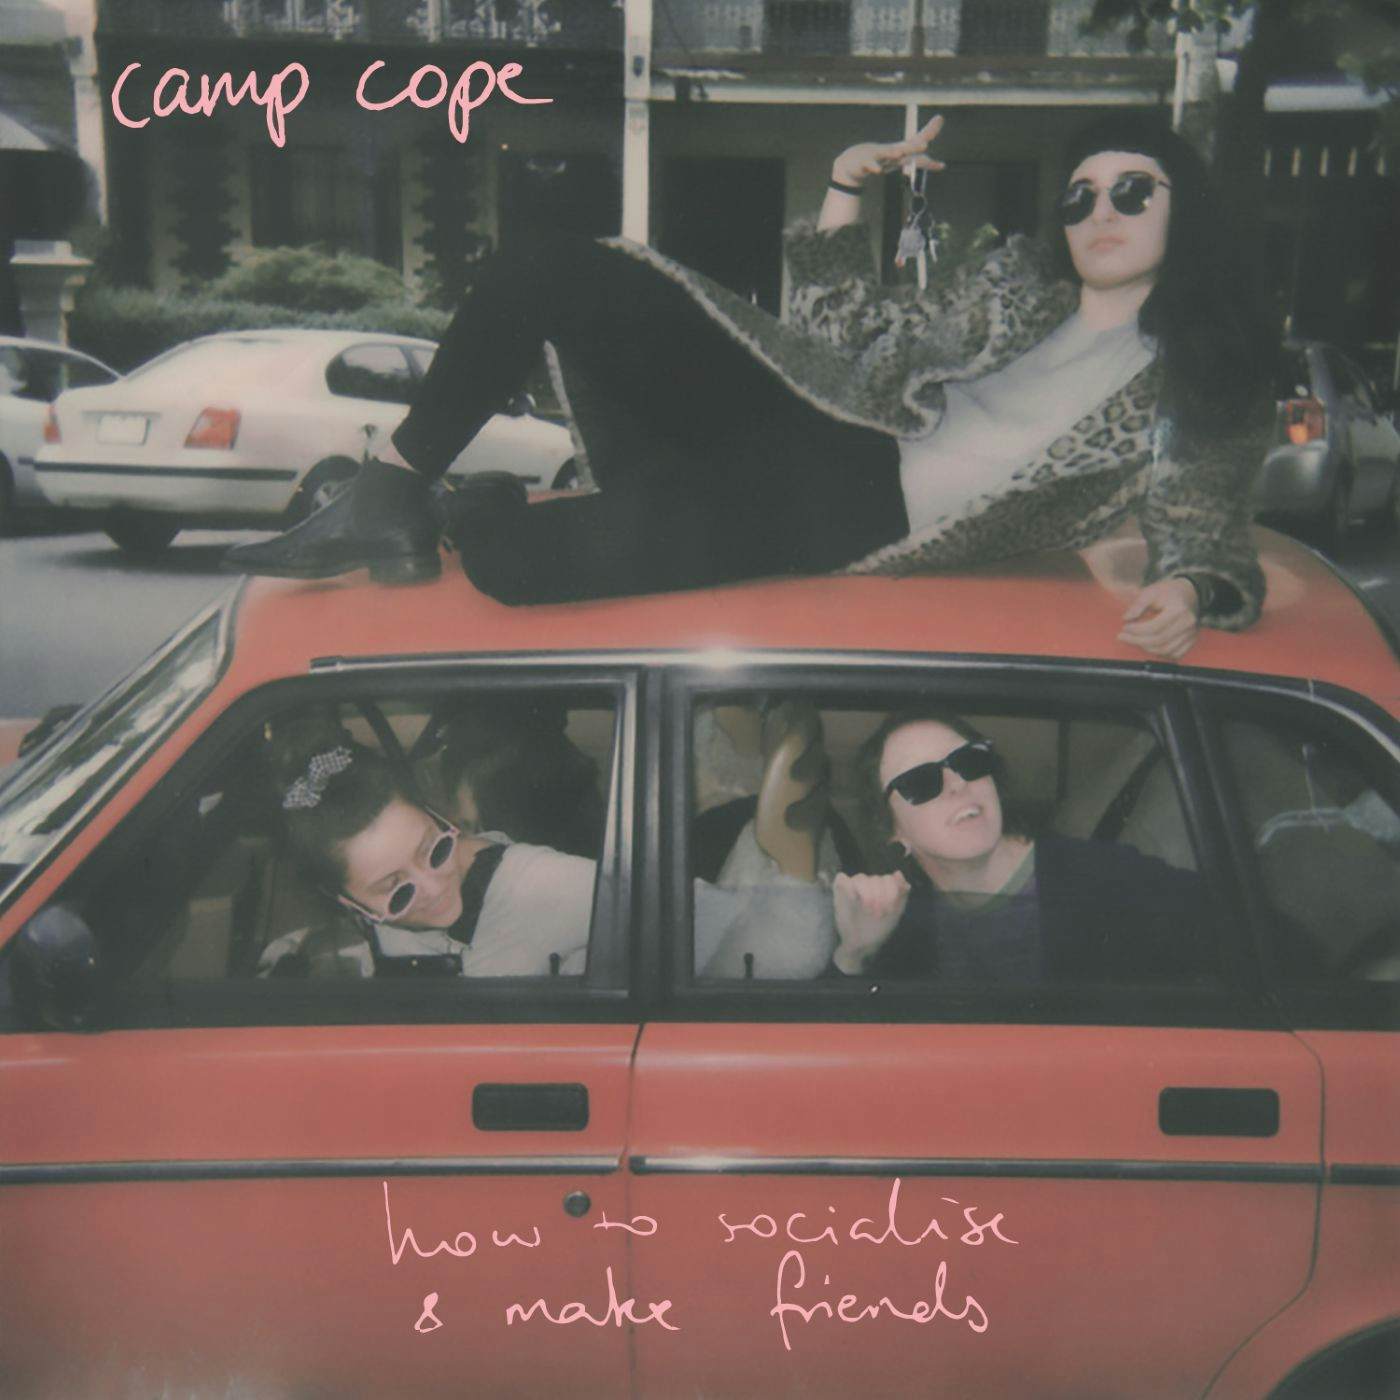 Camp Cope HOW TO SOCIALISE & MAKE FRIENDS CD